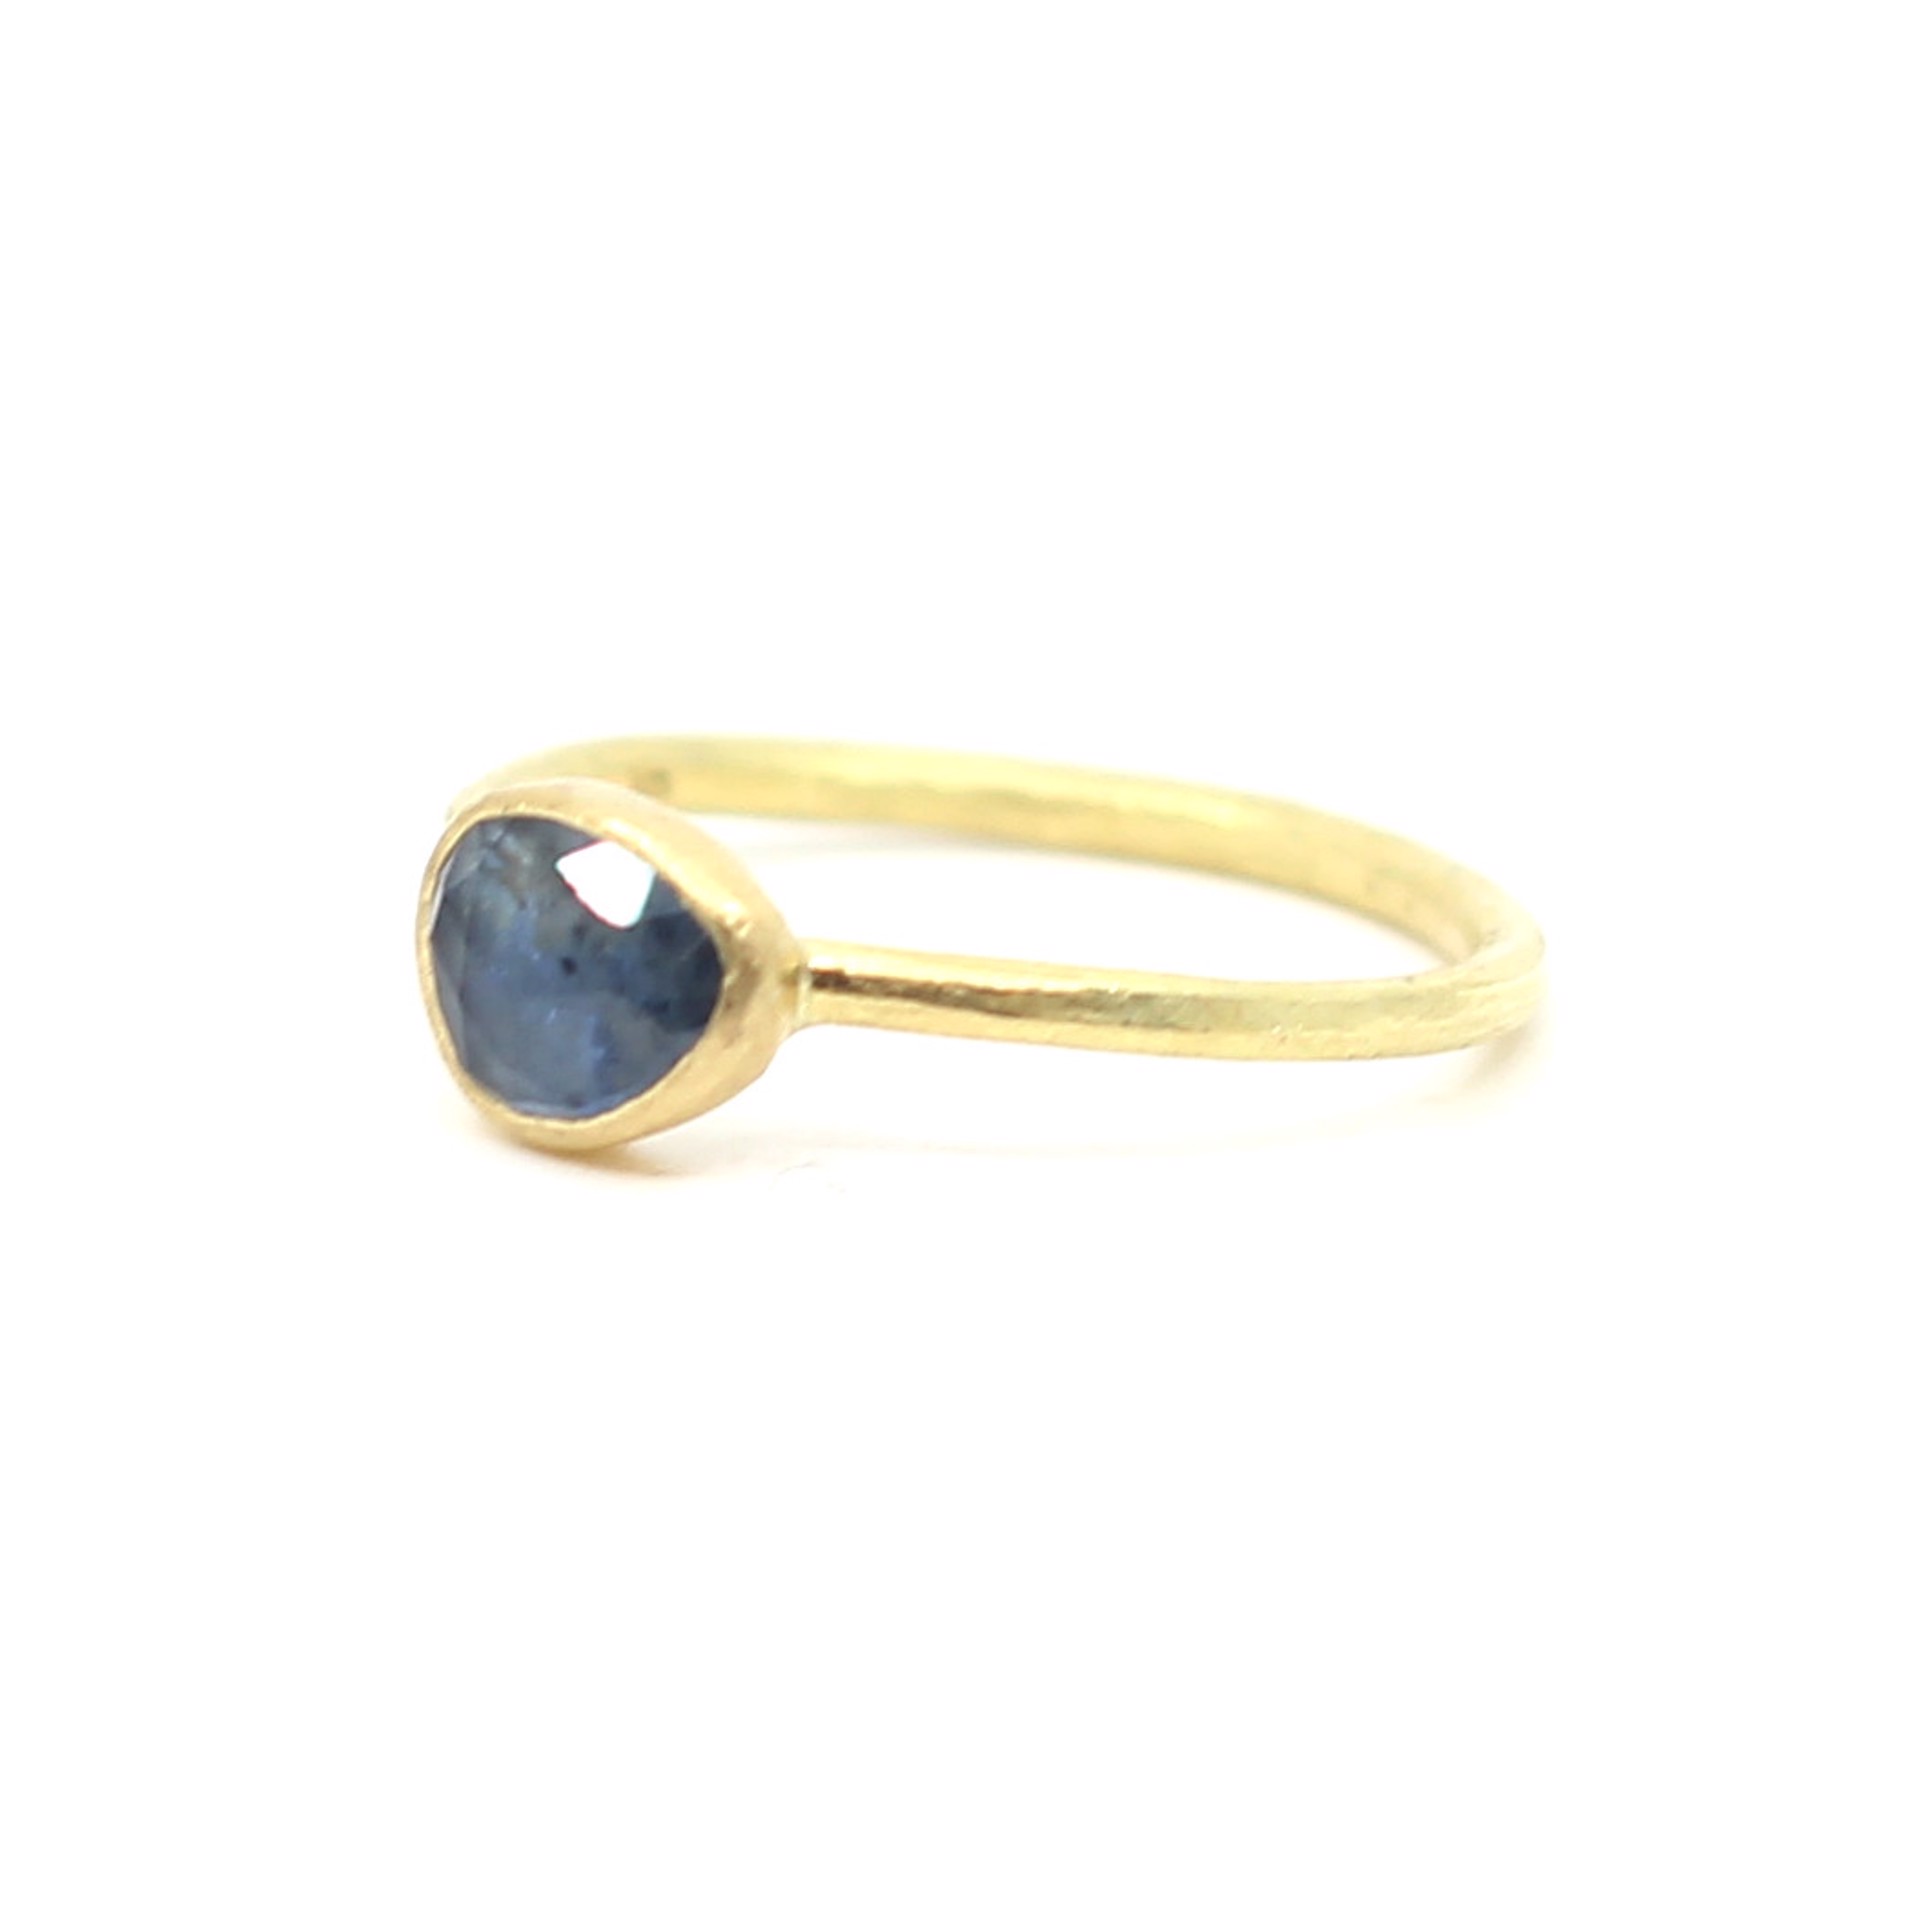 Blue Sapphire Ring by Leia Zumbro